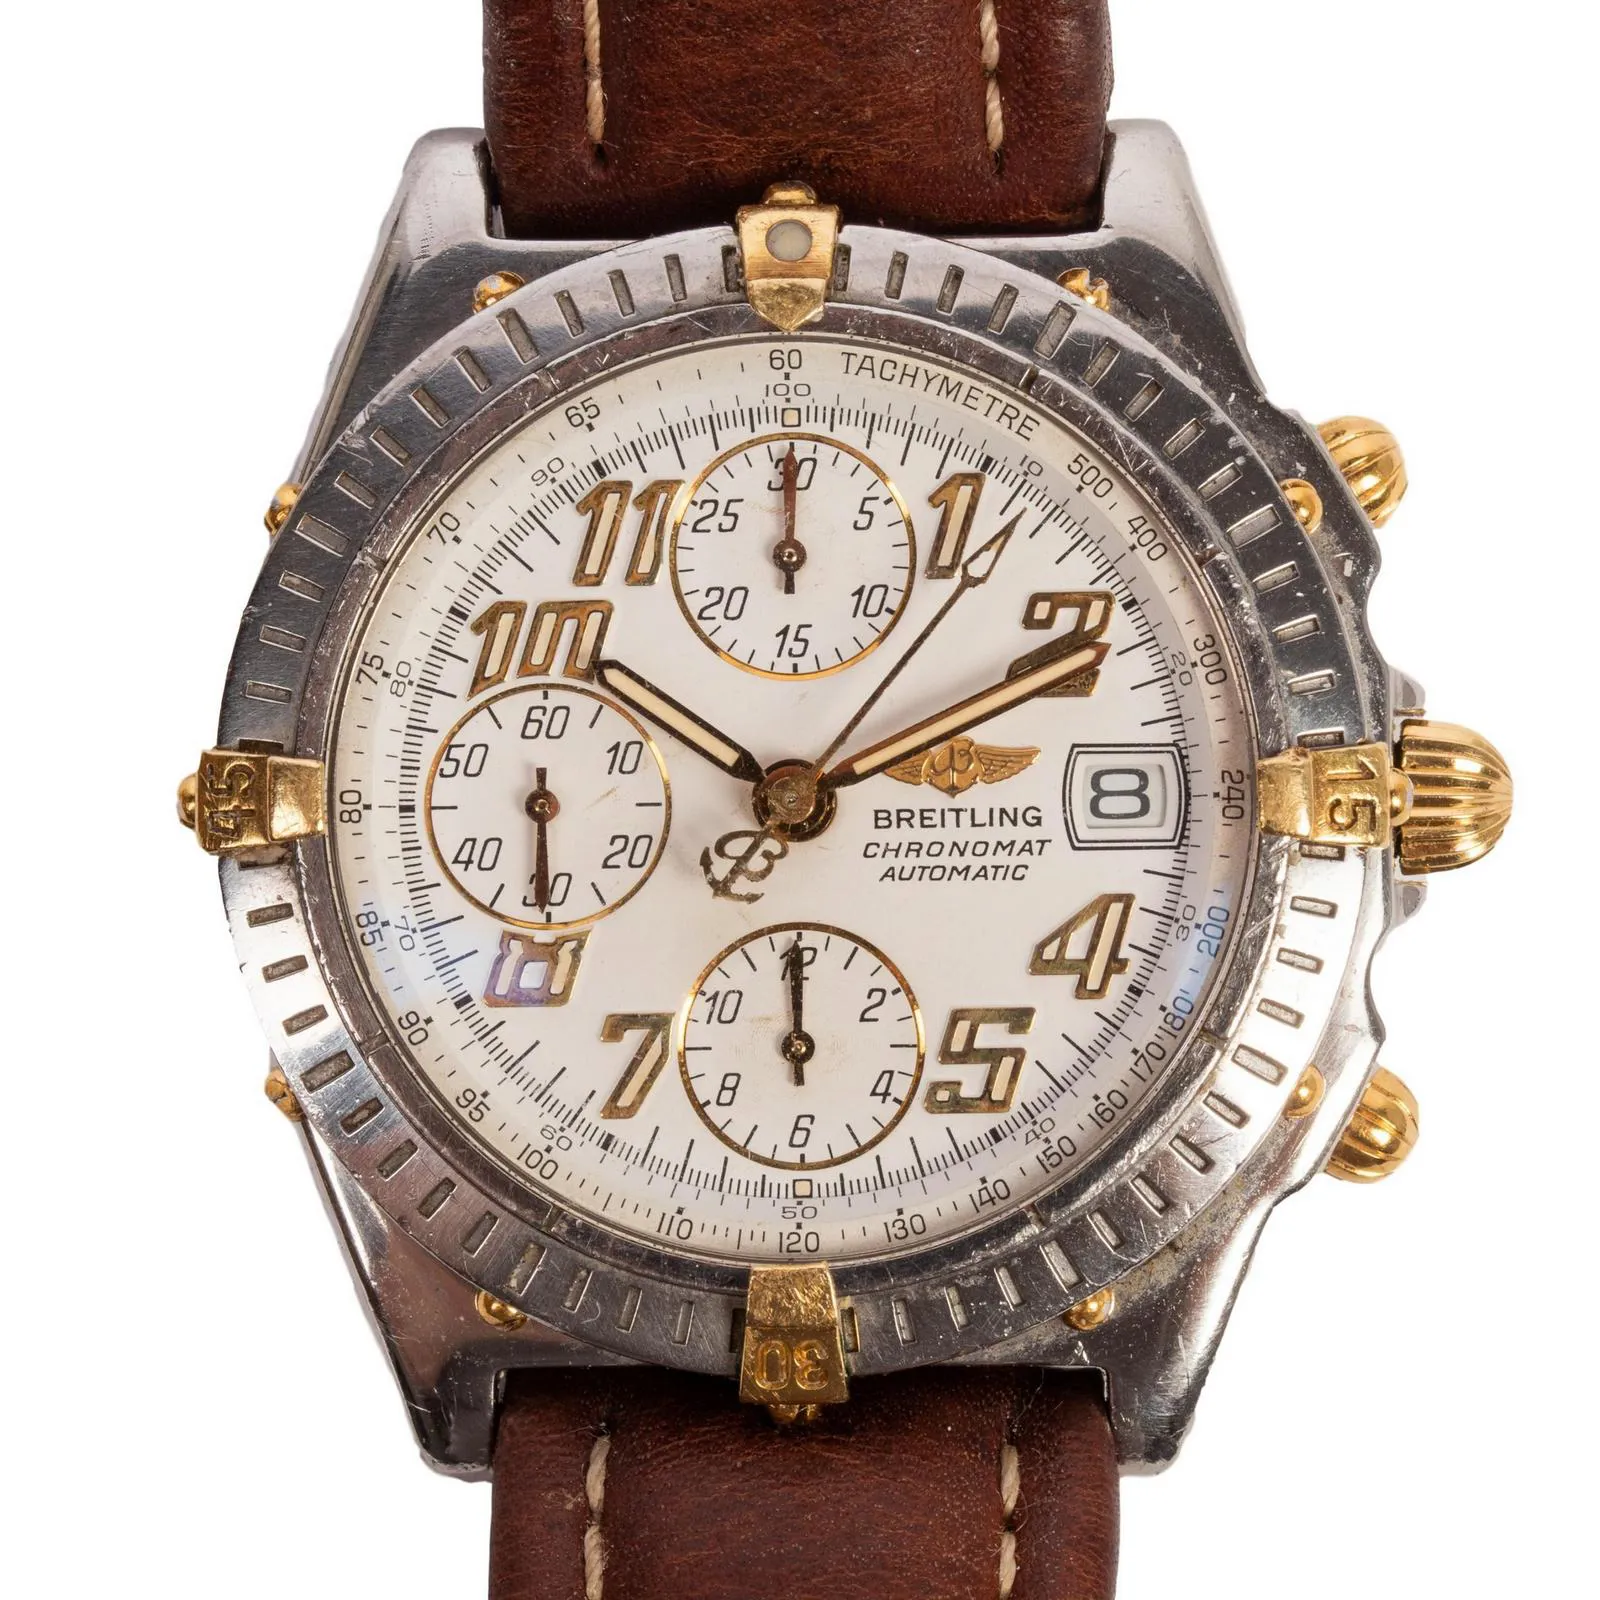 Breitling Chronomat B13350 38mm Yellow gold and stainless steel White